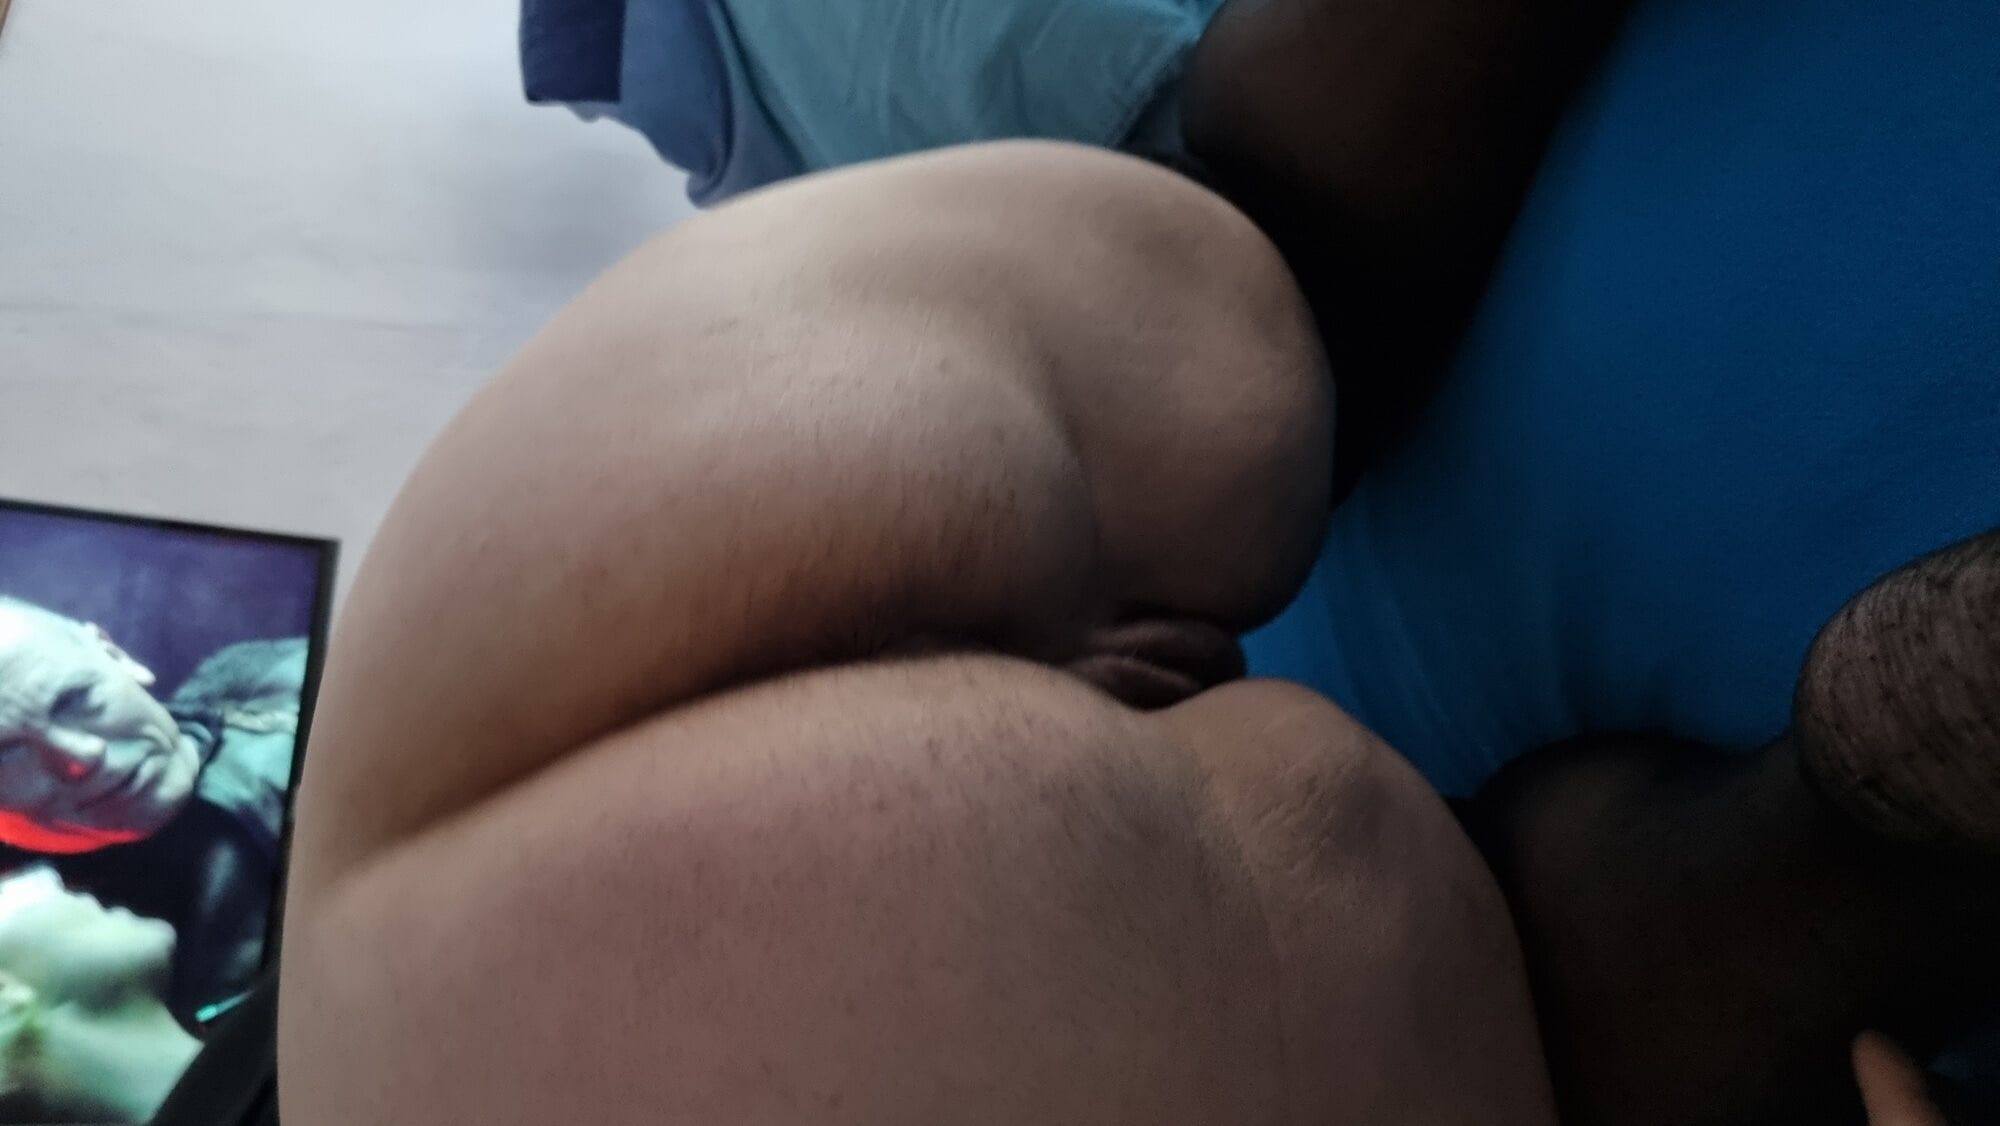 My fat ass wit toy in pussy #5